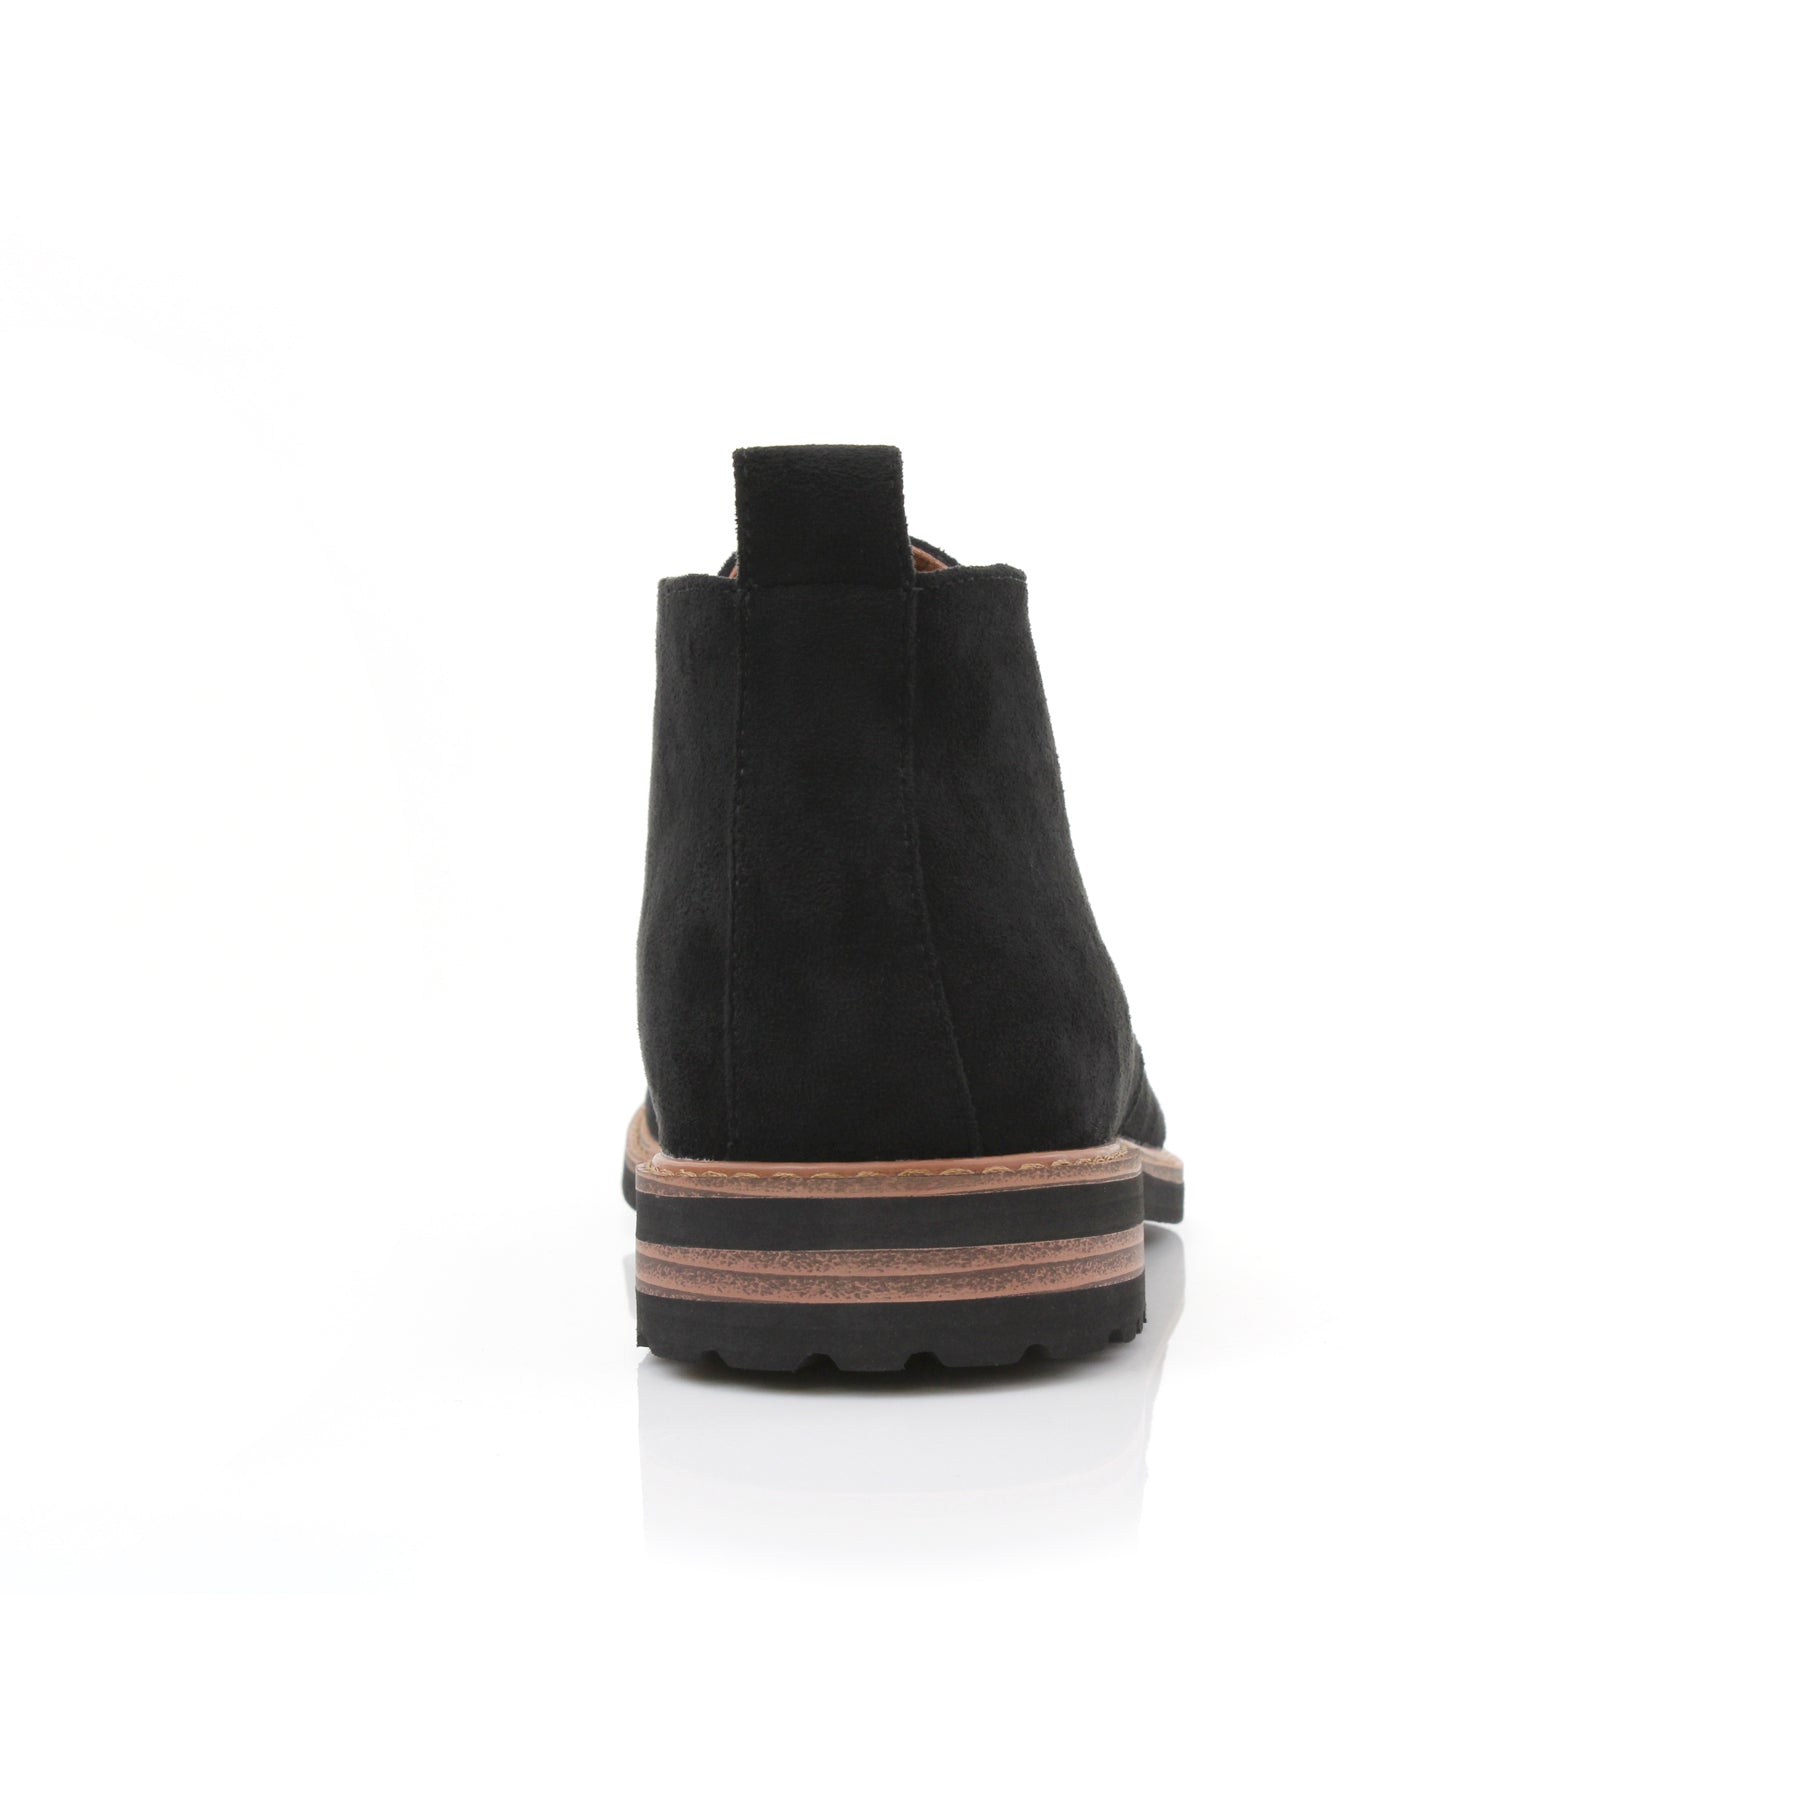 Suede Chukka Boots | Pablo by Ferro Aldo | Conal Footwear | Back Angle View